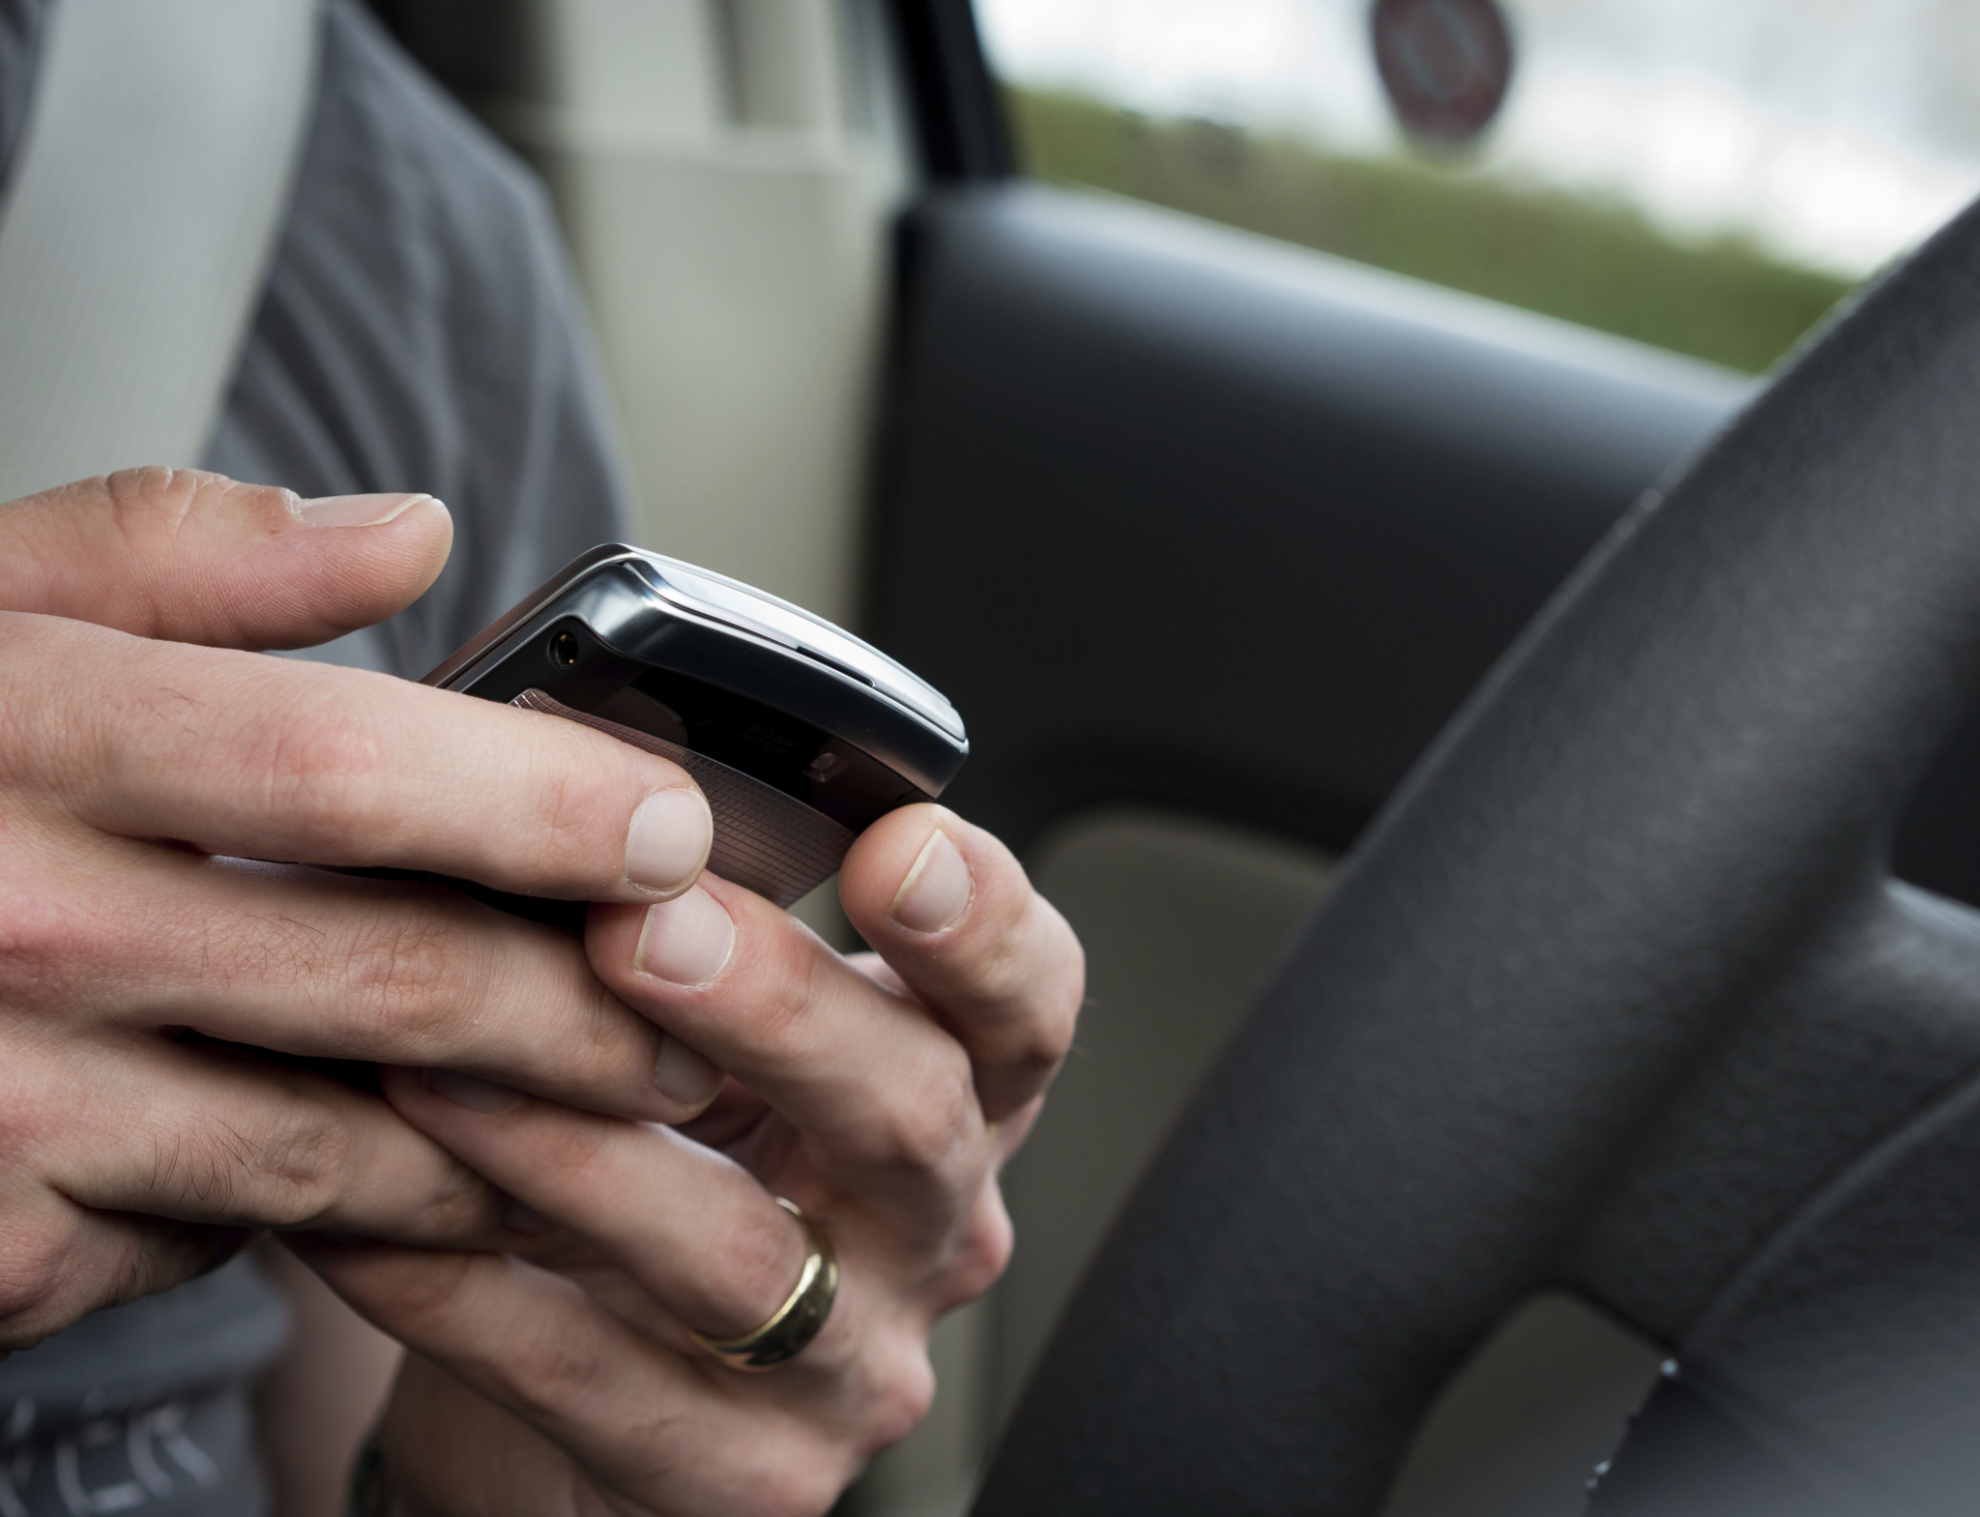 Survey compares distracted driving habits of teens and adults